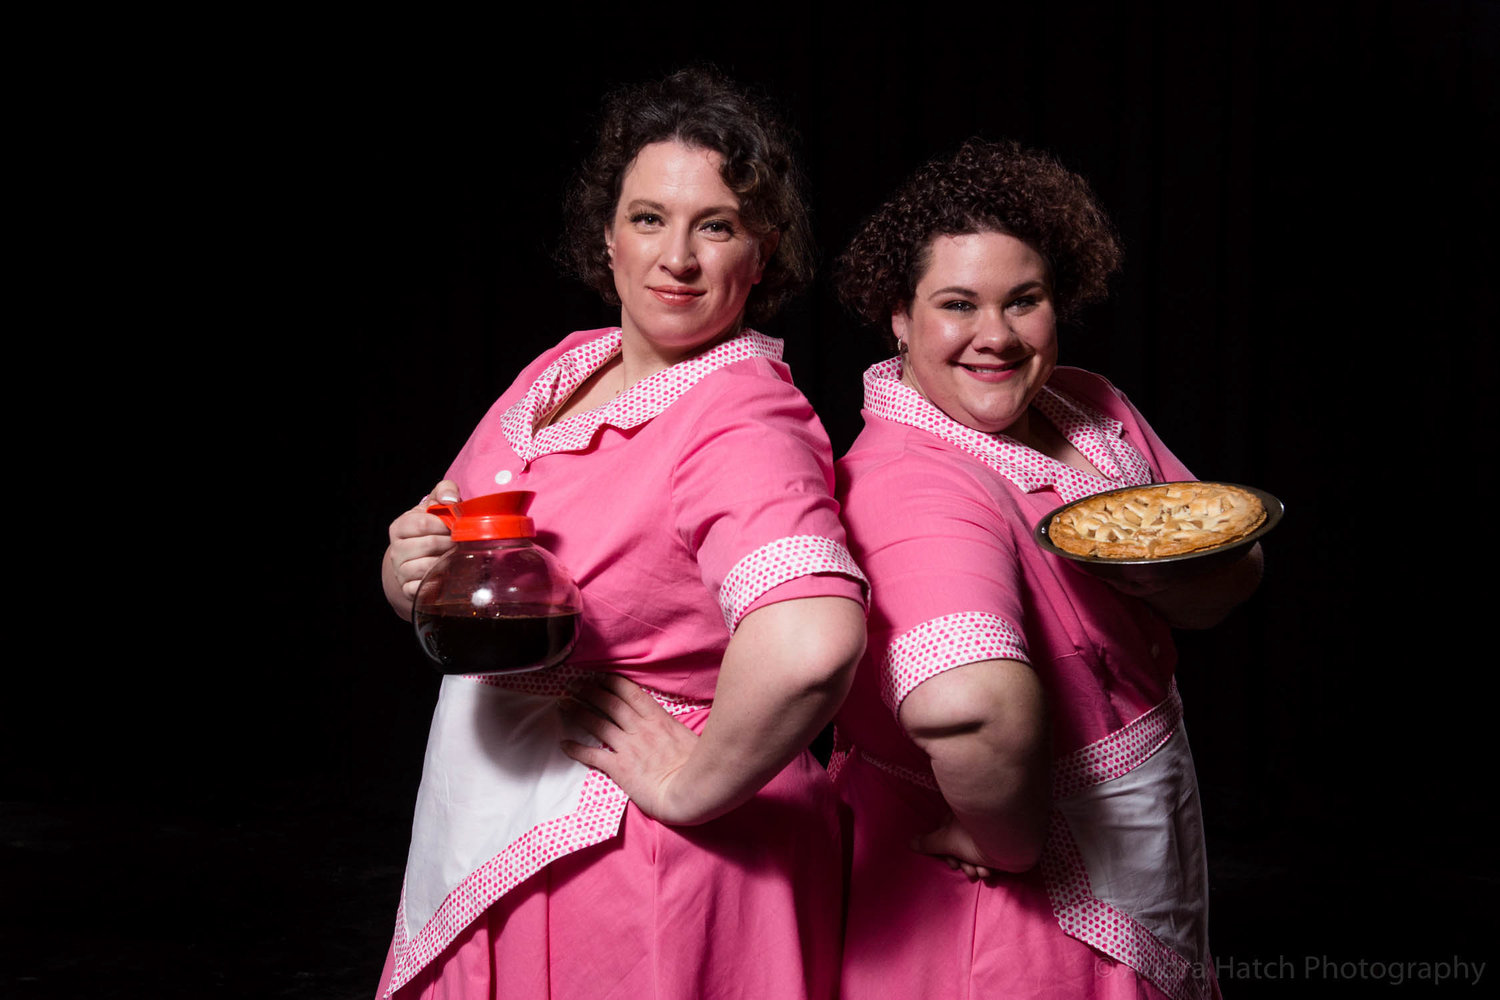 Meet the Dinettes!! Sara Sturdivant and Kelsey Franklin as Prudie and Rhetta Cupp. 1